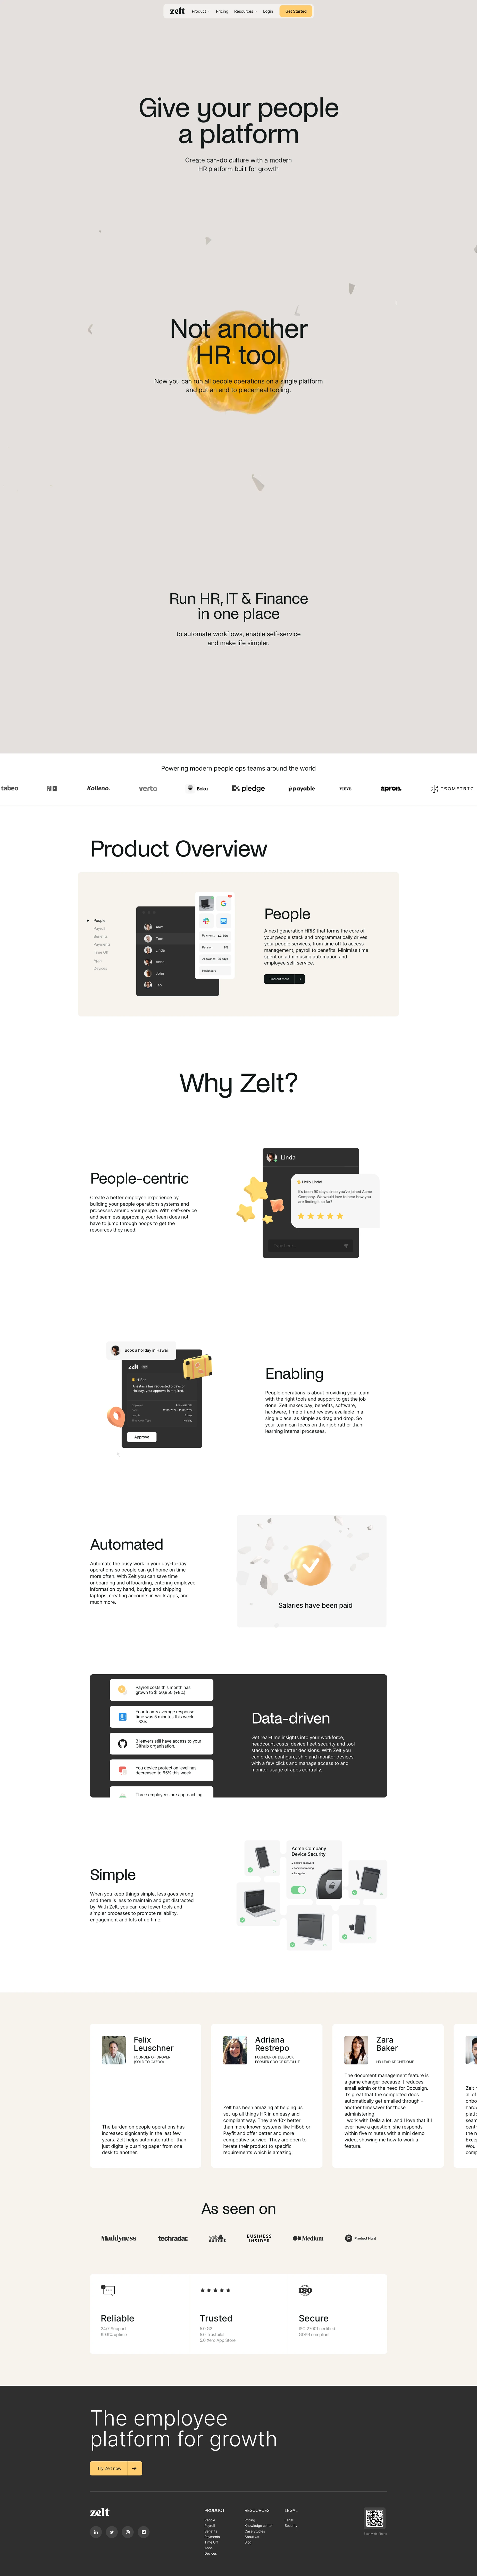 Zelt Landing Page Example: Give your people a platform. Create can-do culture with a modern HR platform built for growth.